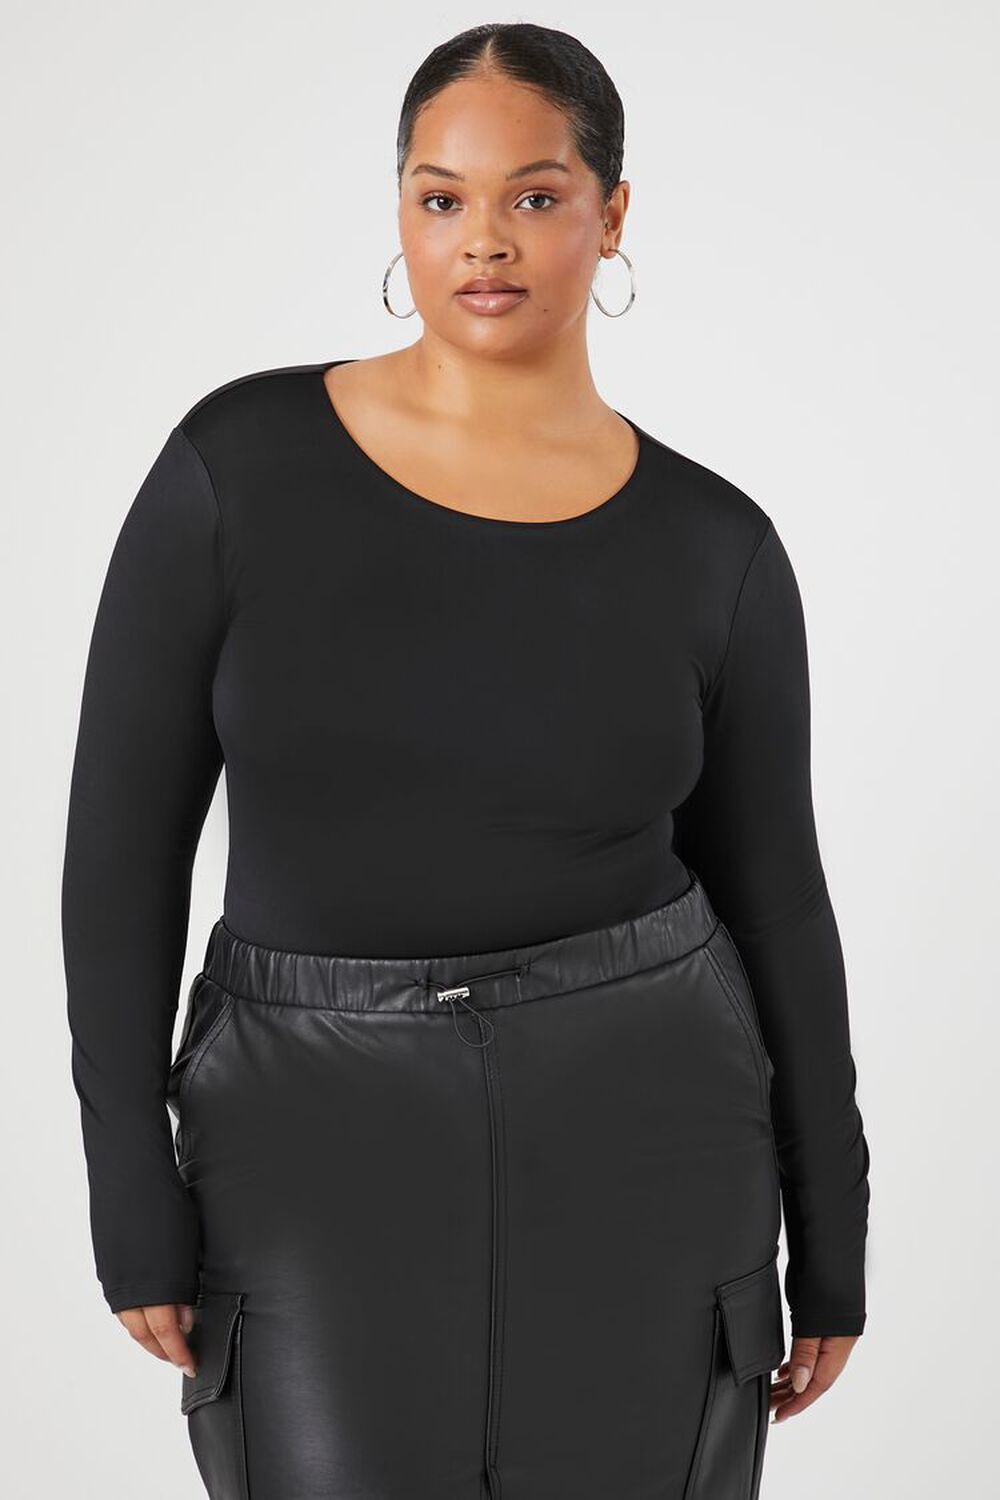 How To Style A Shacket Plus Size - Curves To Contour